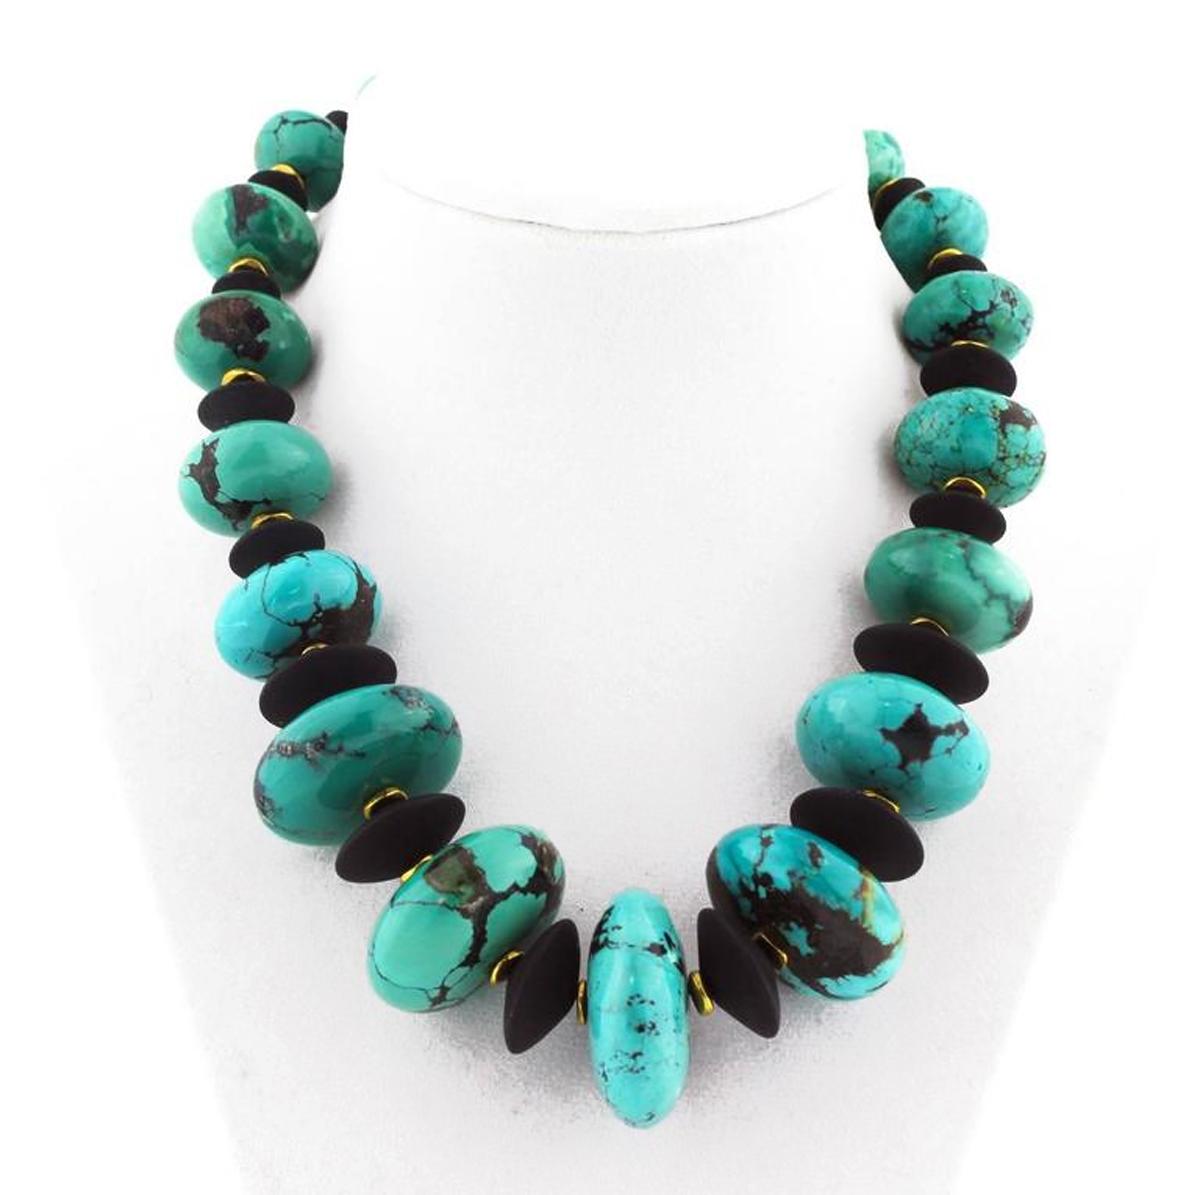 Mixed Cut AJD Dramatic Statement Natural Glowing American Turquoise & Black Onyx Necklace For Sale